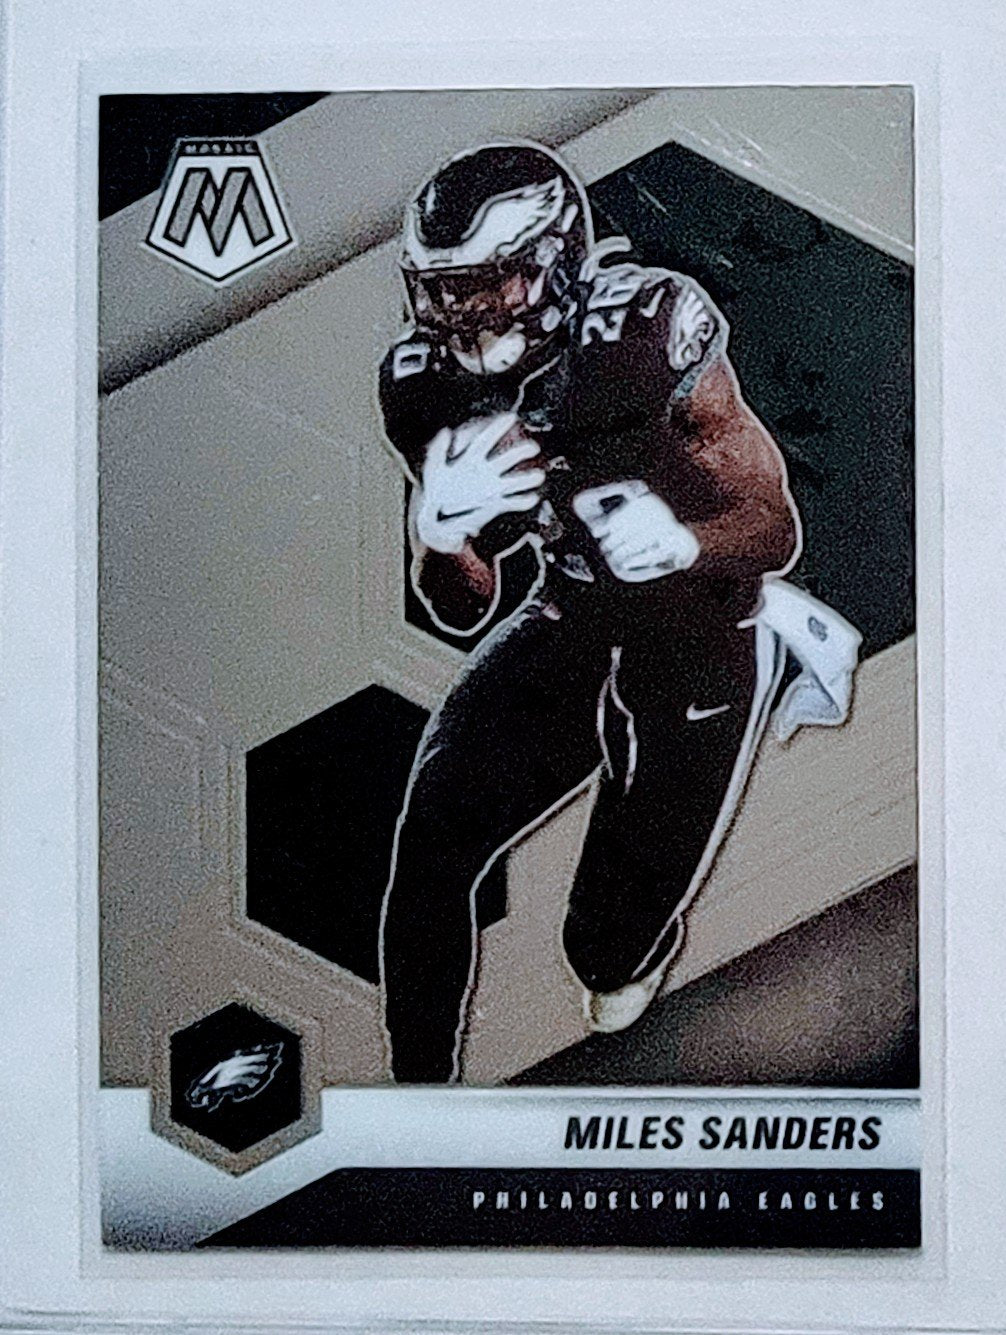 2021 Panini Mosaic Miles Sanders Football Card AVM1 simple Xclusive Collectibles   